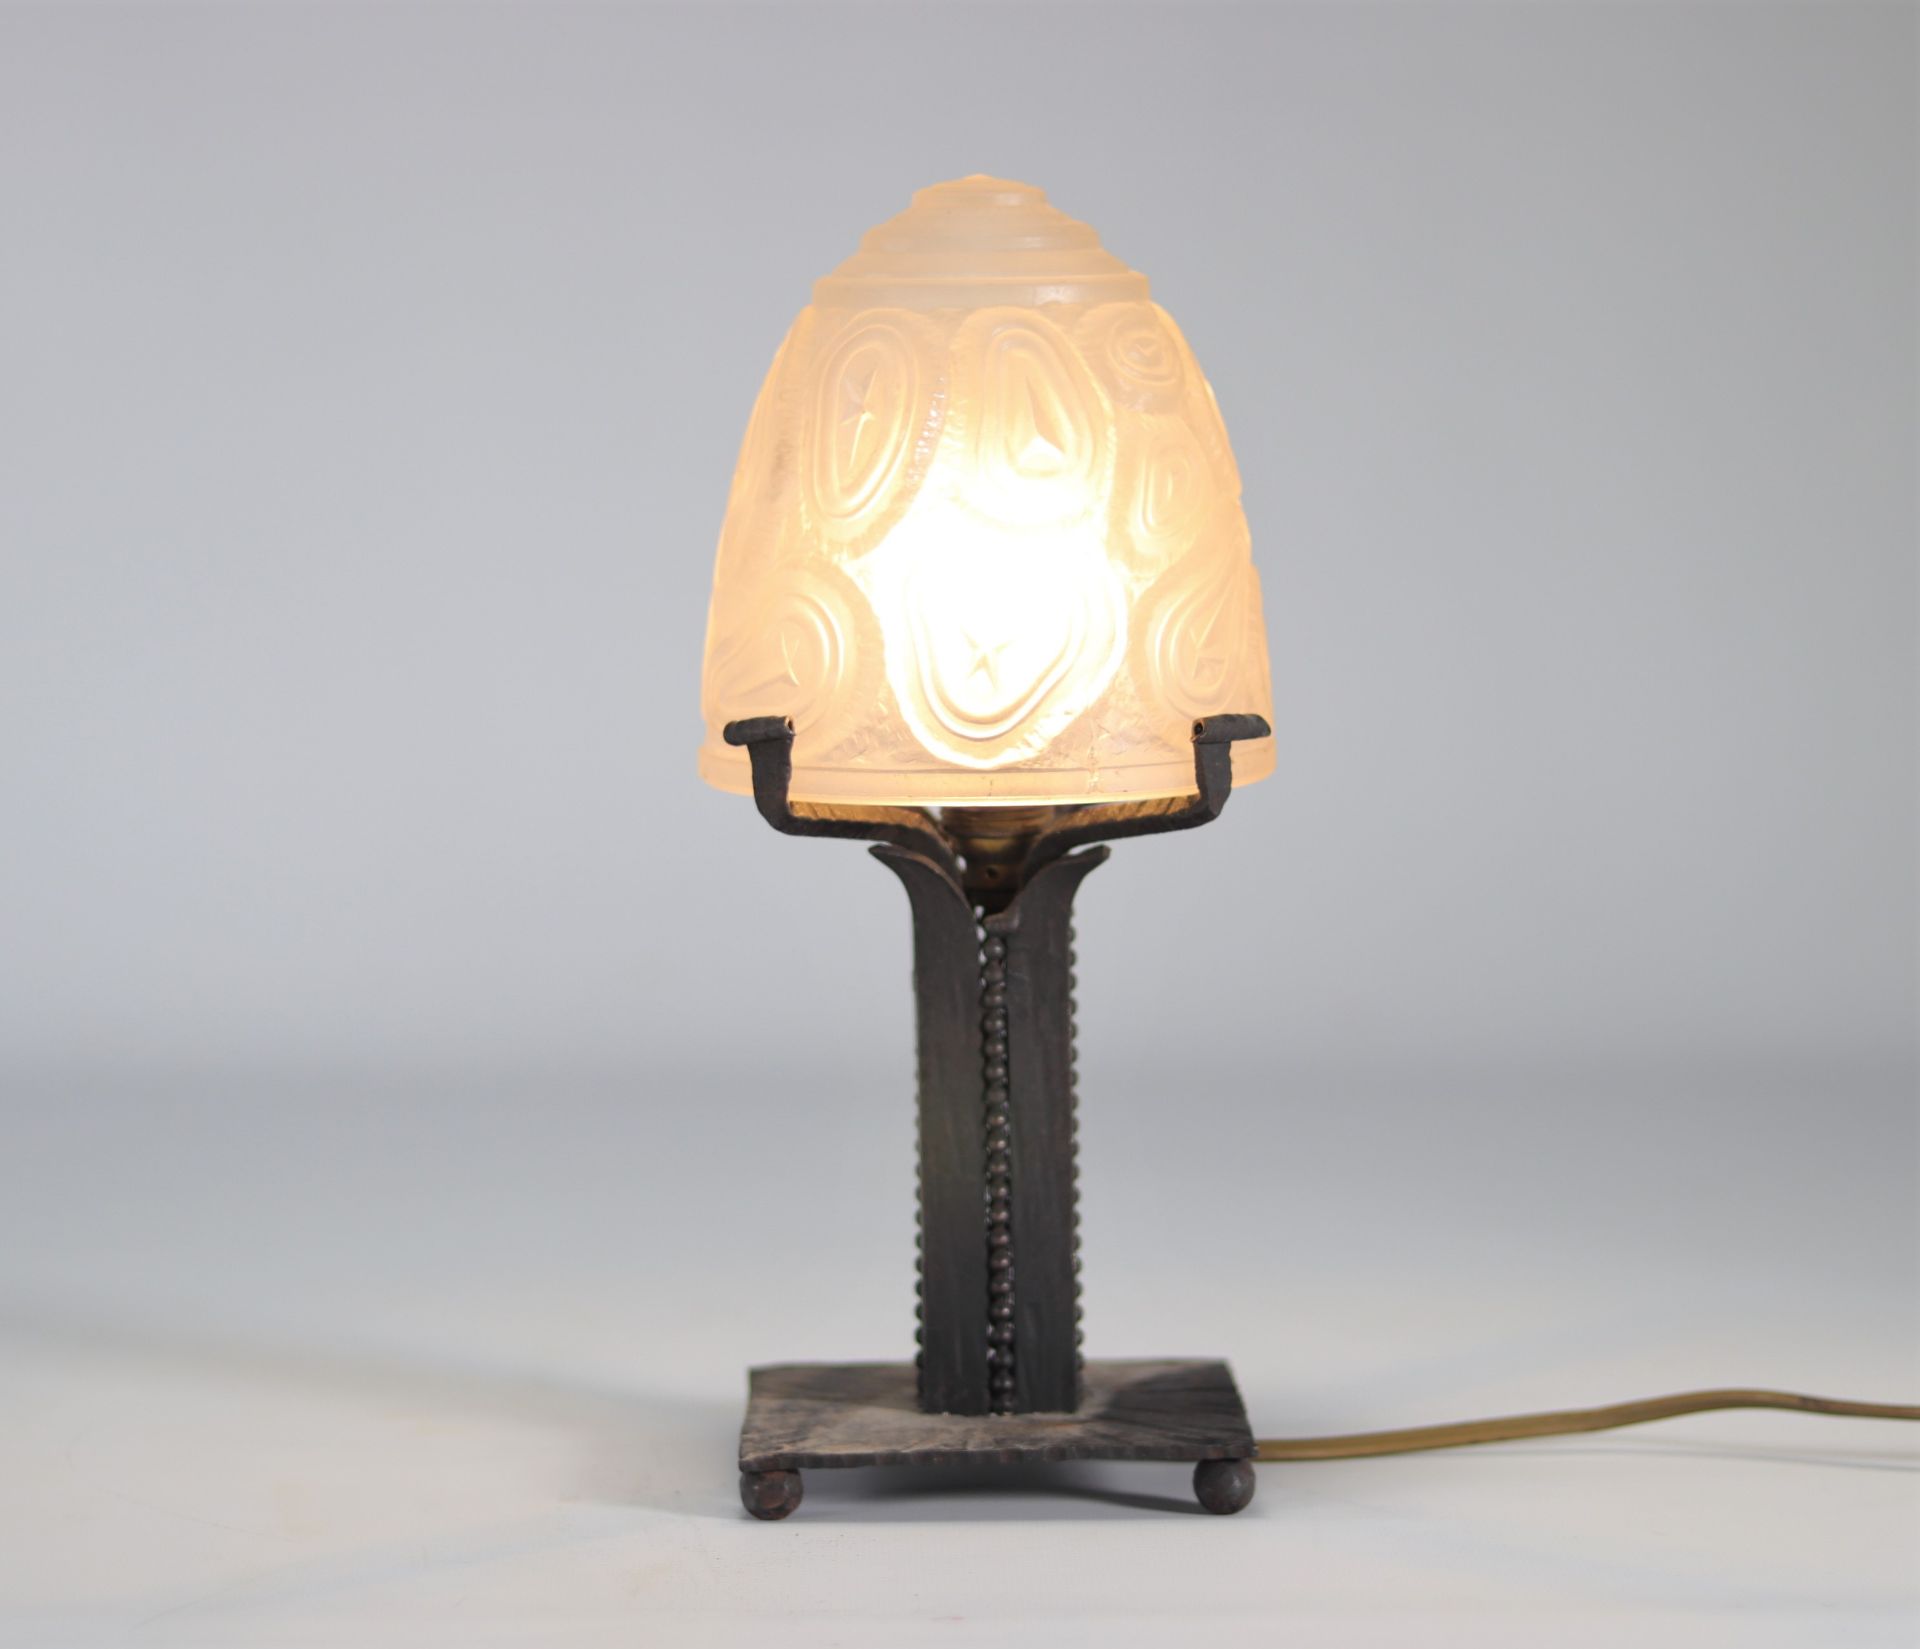 Art Deco desk lamp with hammered wrought iron base with geometric pattern - Image 2 of 3